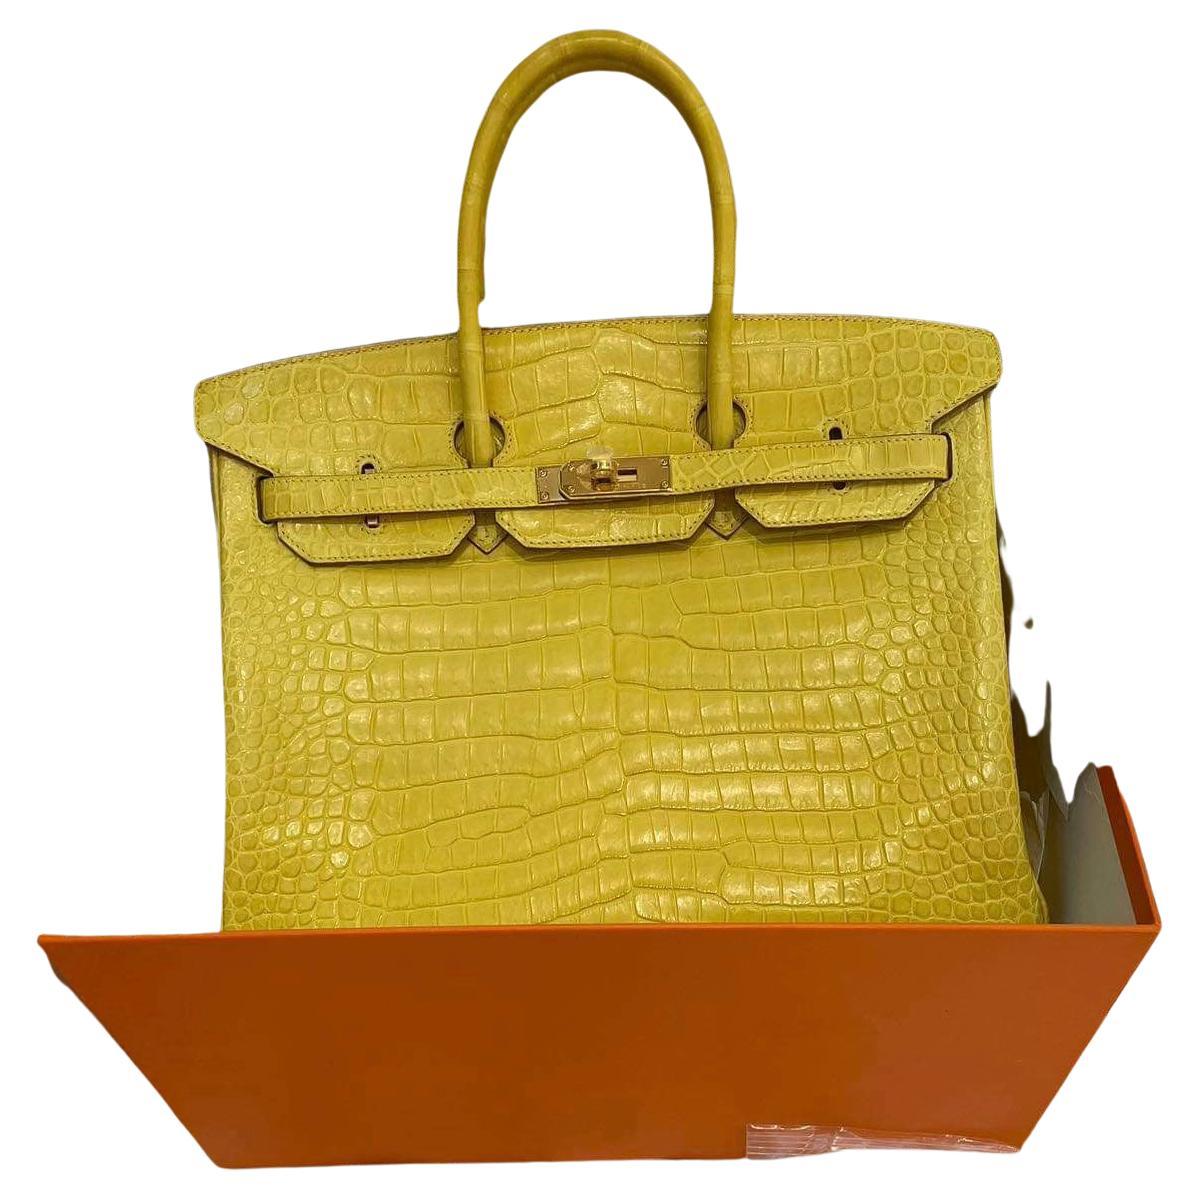 This is the authentic RARE HERMES crocodile Birkin 35 in Mimosa with gold hardware. Extremely rare combination.
While Hermès is known for their incredible colors, their selection of yellows alone spans many shades. This stunning 35cm Mimosa Birkin